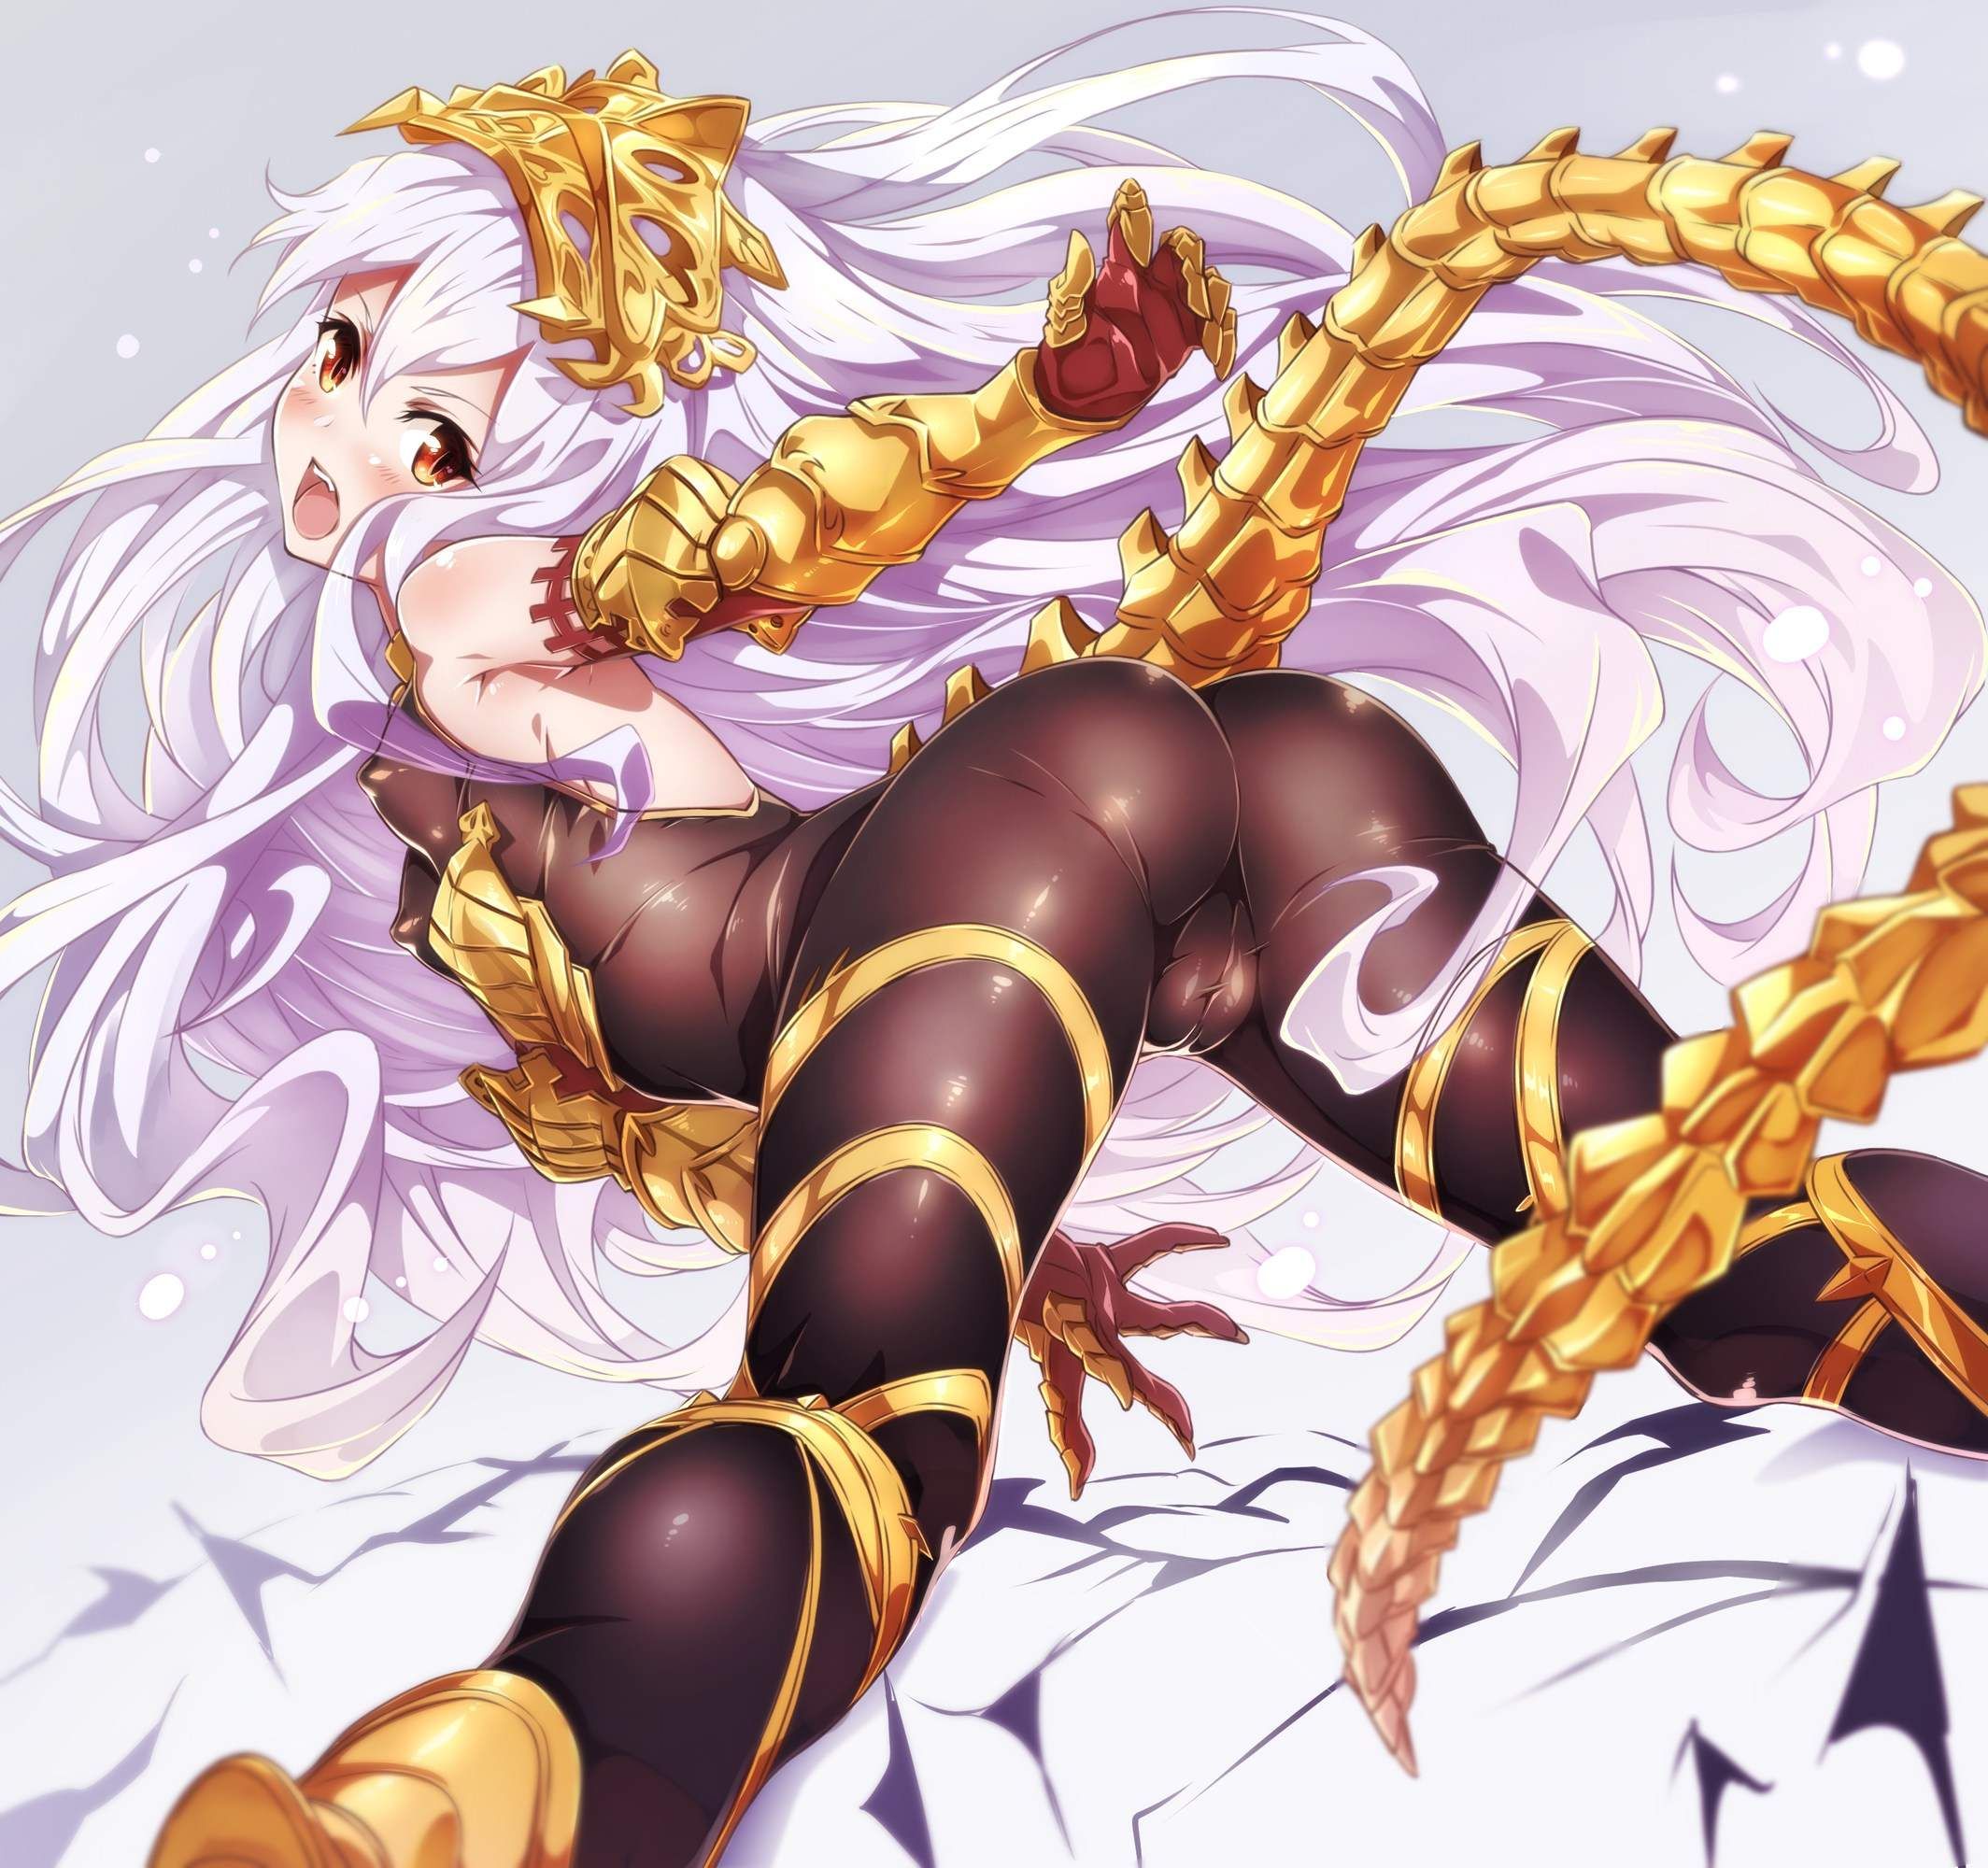 [Gran Blue Fantasy] you want to see a naughty image of Medusa? 4